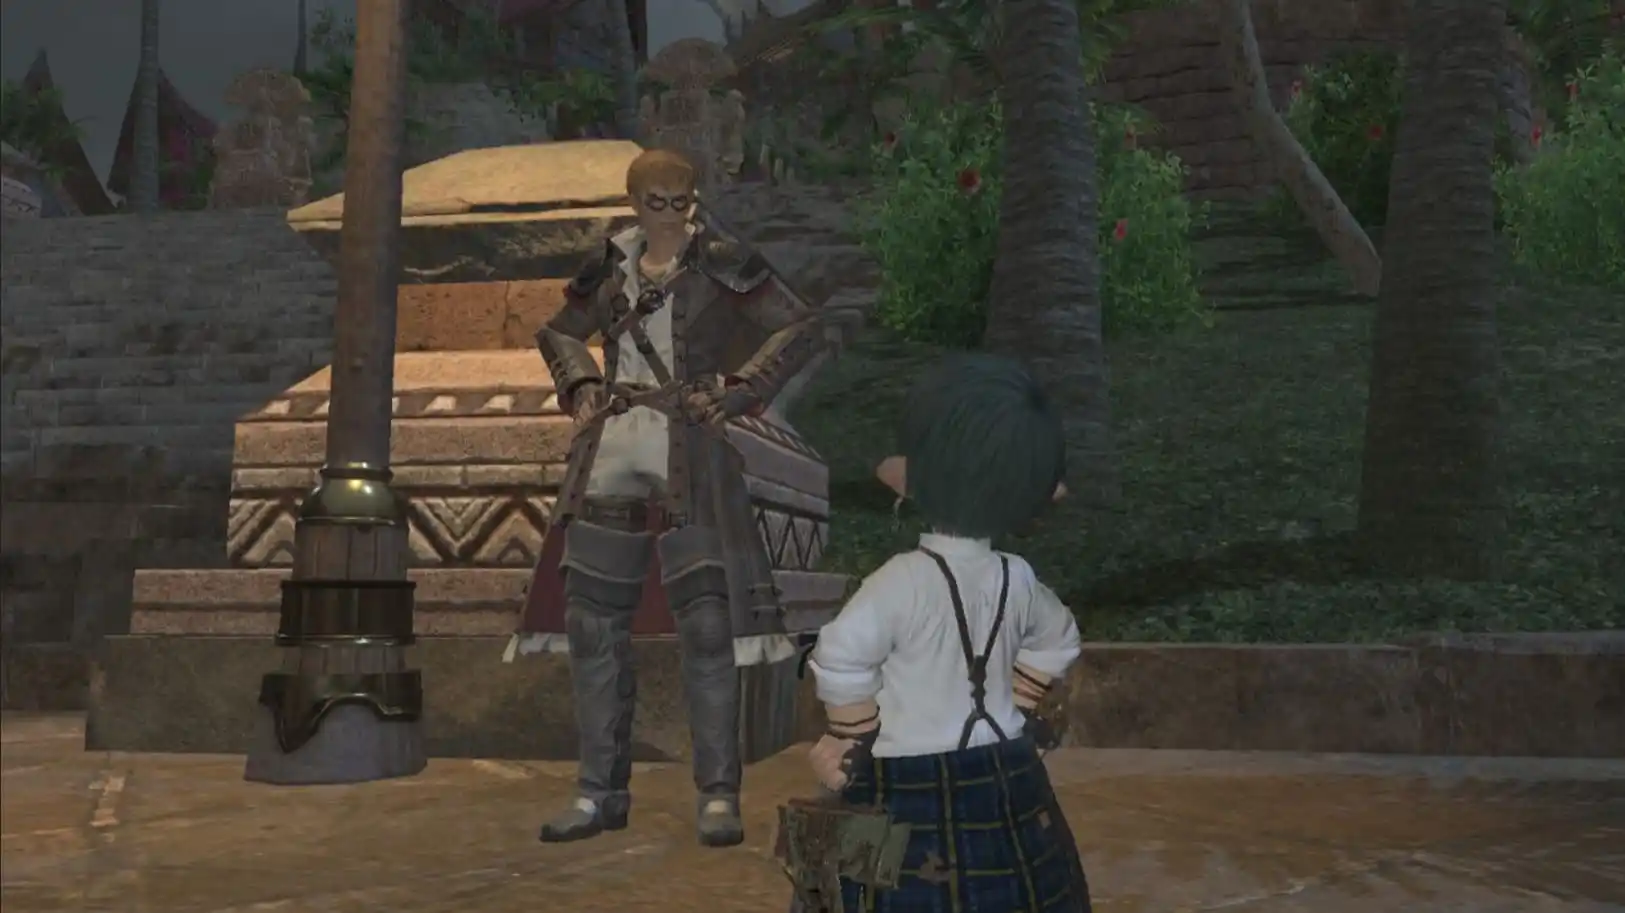 Player in Final Fantasy XIV looking at Wandering Minstrel, unlock NPC for extreme trials in Final Fantasy XIV Dawntrail.